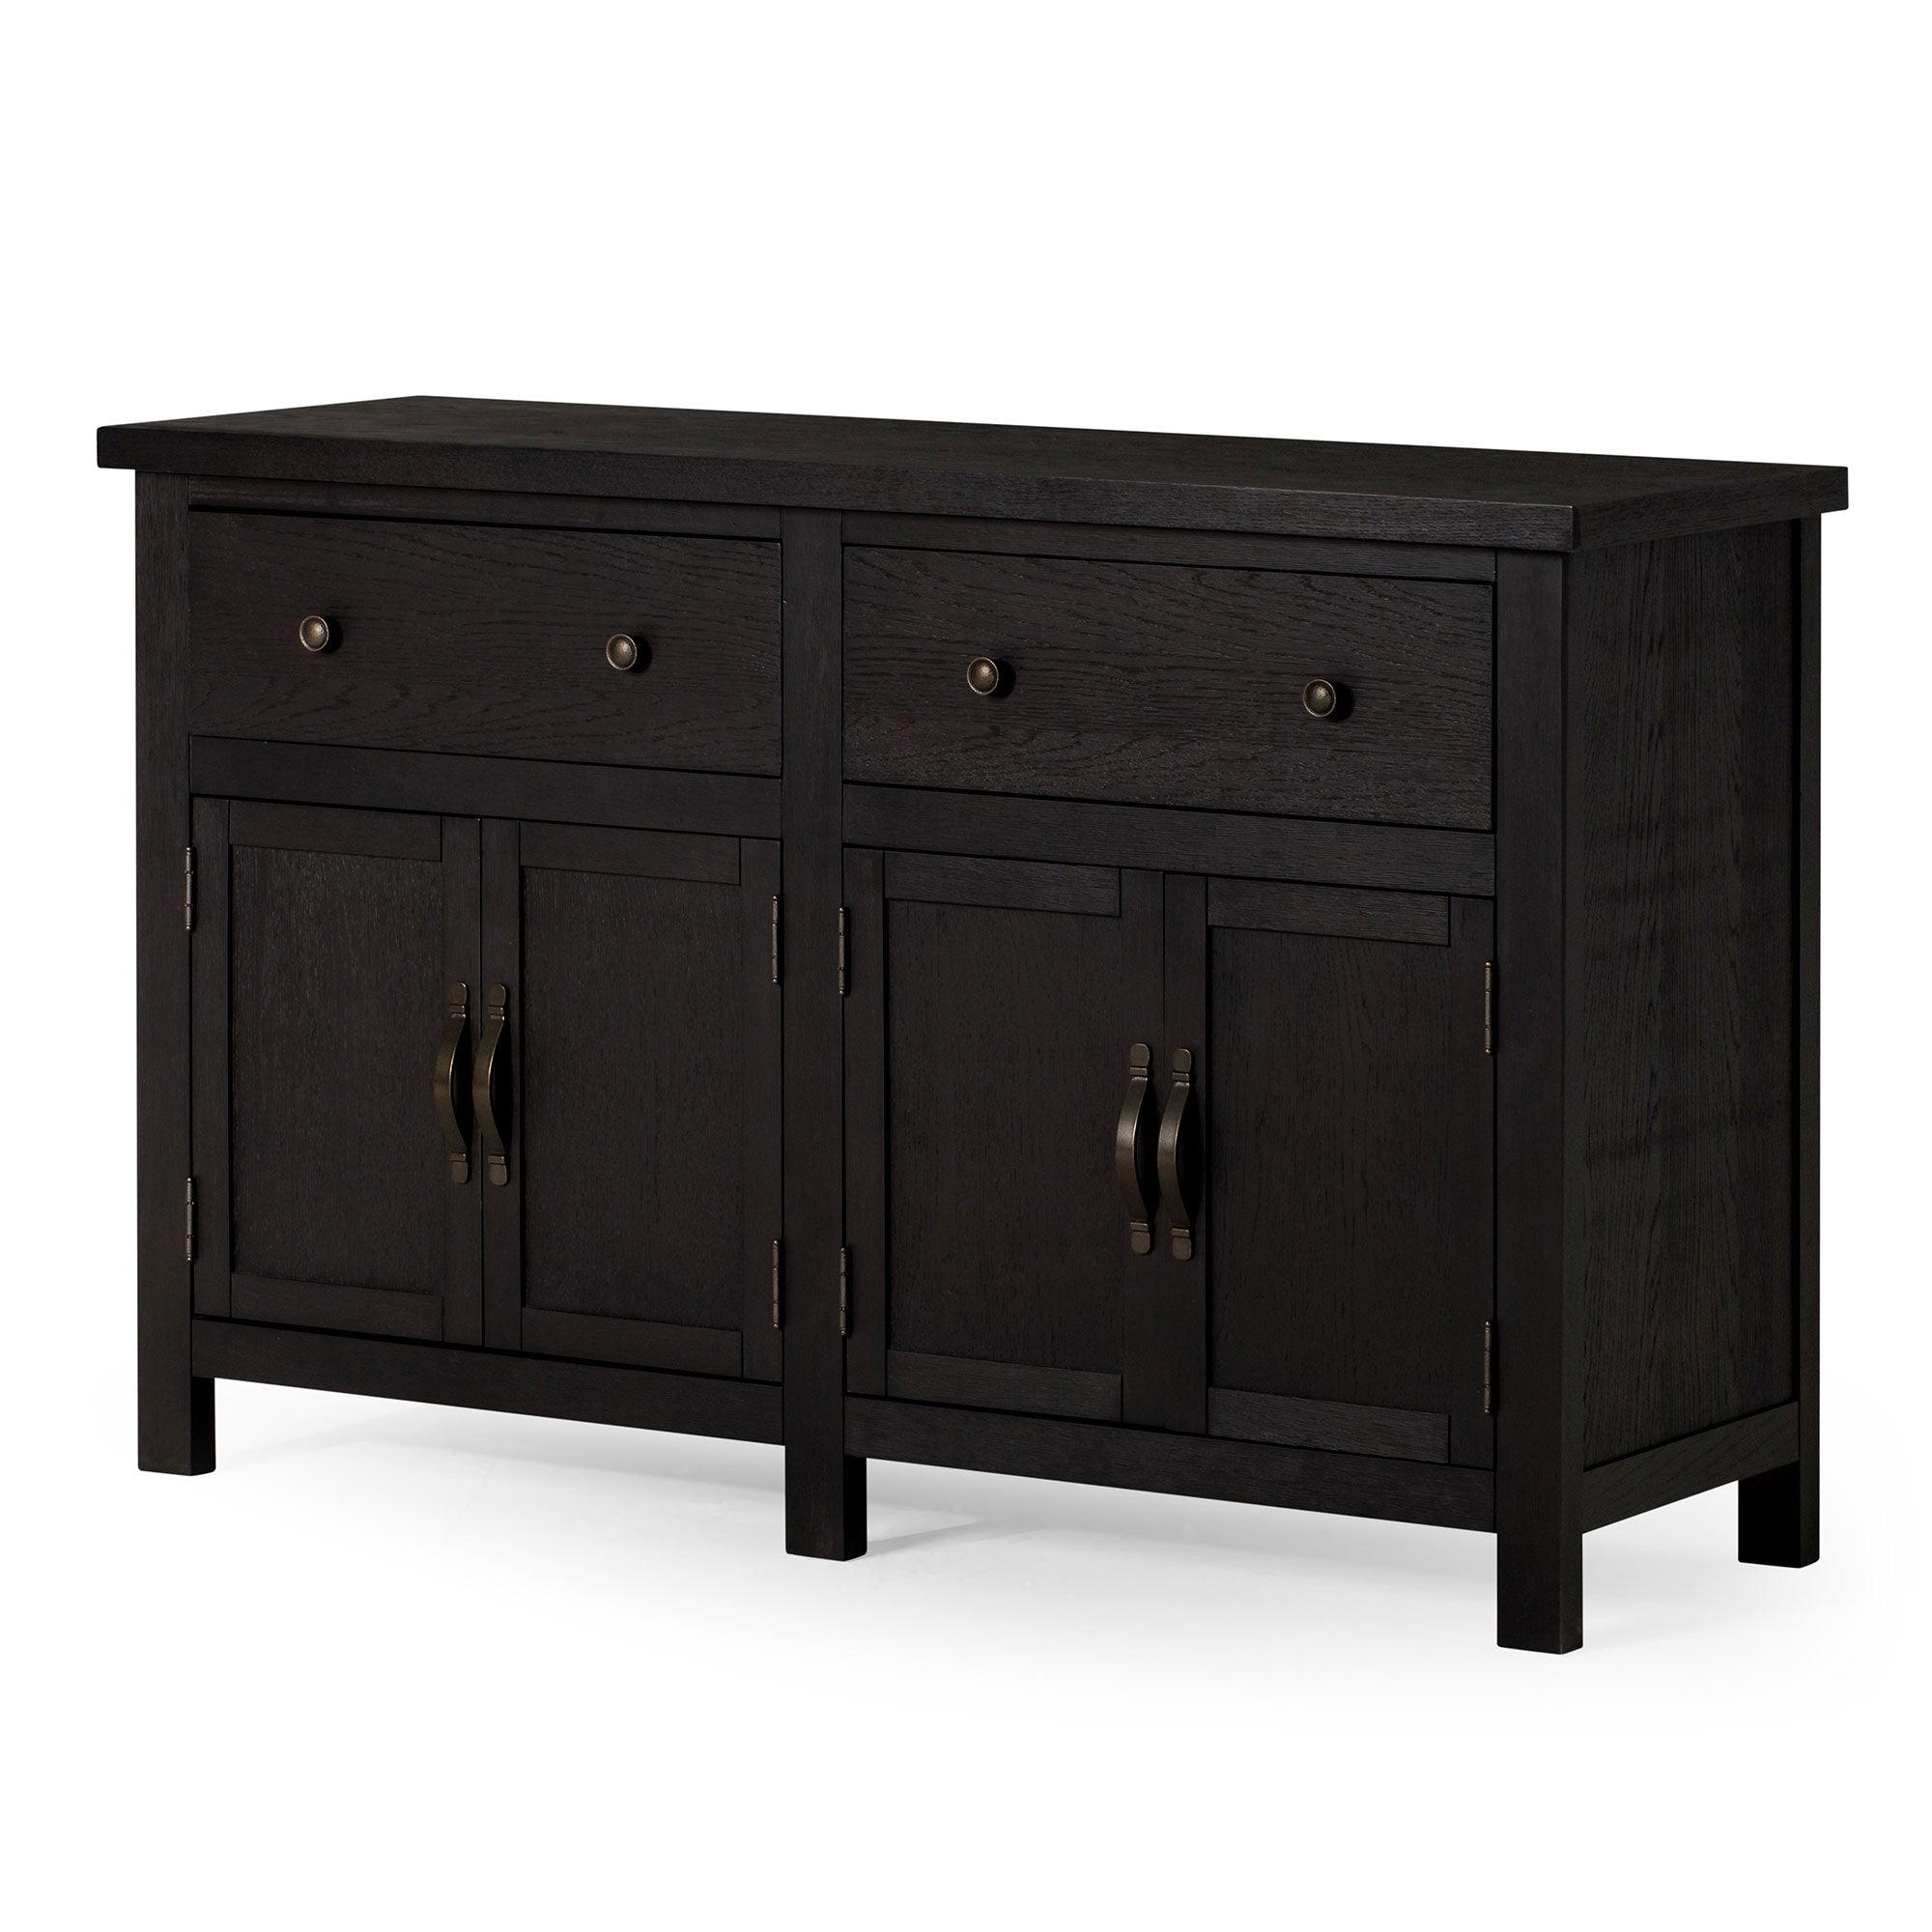 Felix Organic Wooden Sideboard in Weathered Black Finish in Cabinets by Maven Lane